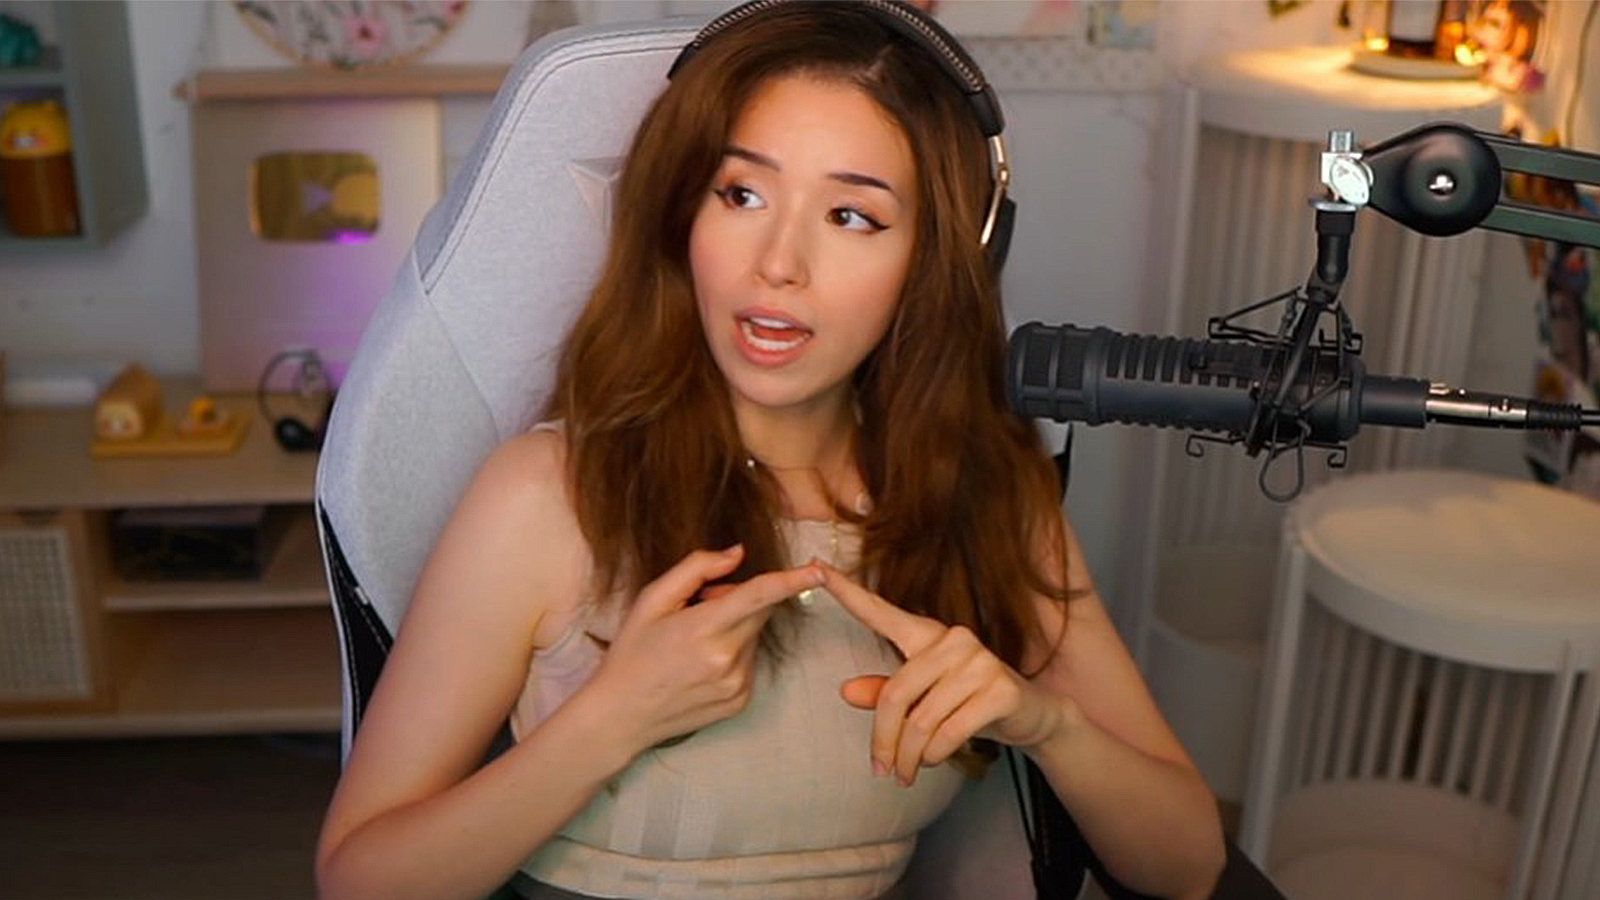 Pokimane destroys Twitch troll for saying she’s wearing “too much makeup”